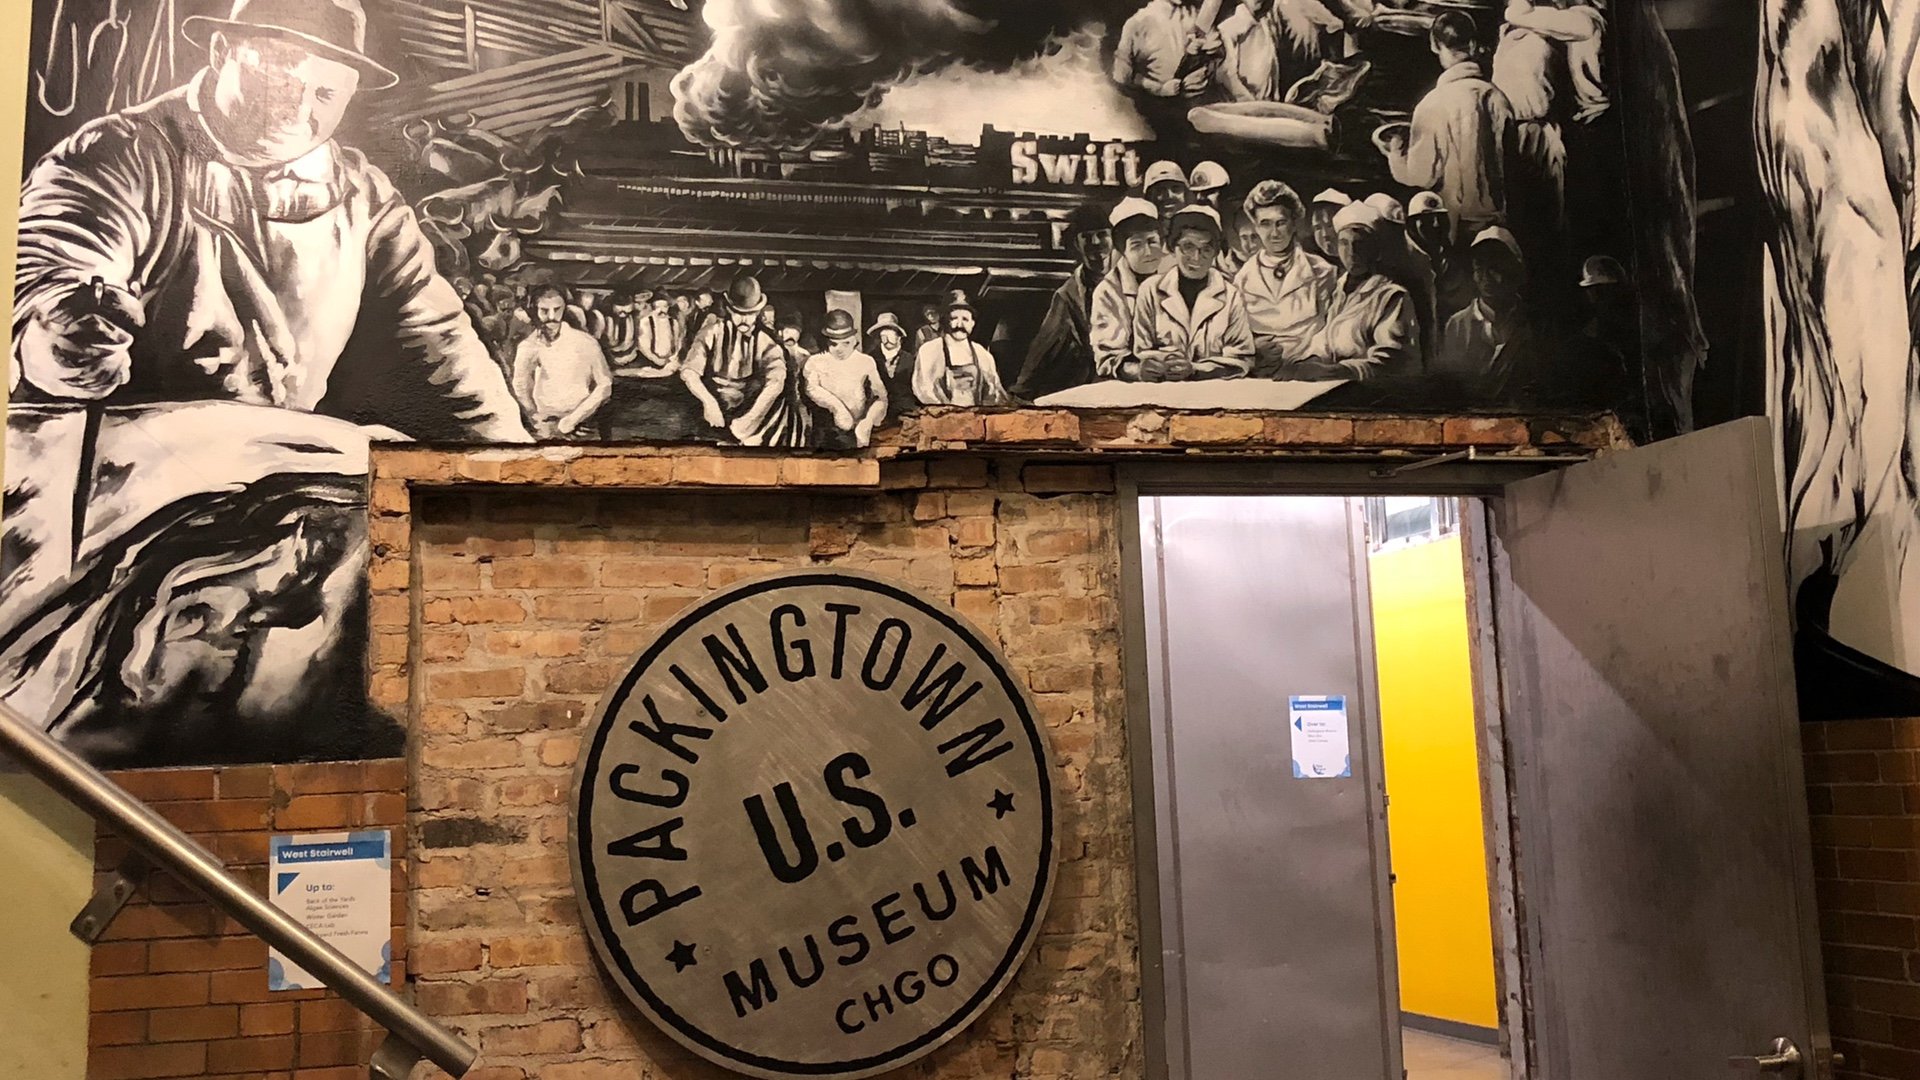 The Packingtown Museum's opening at The Plant is now on hold. (Patty Wetli / WTTW News)